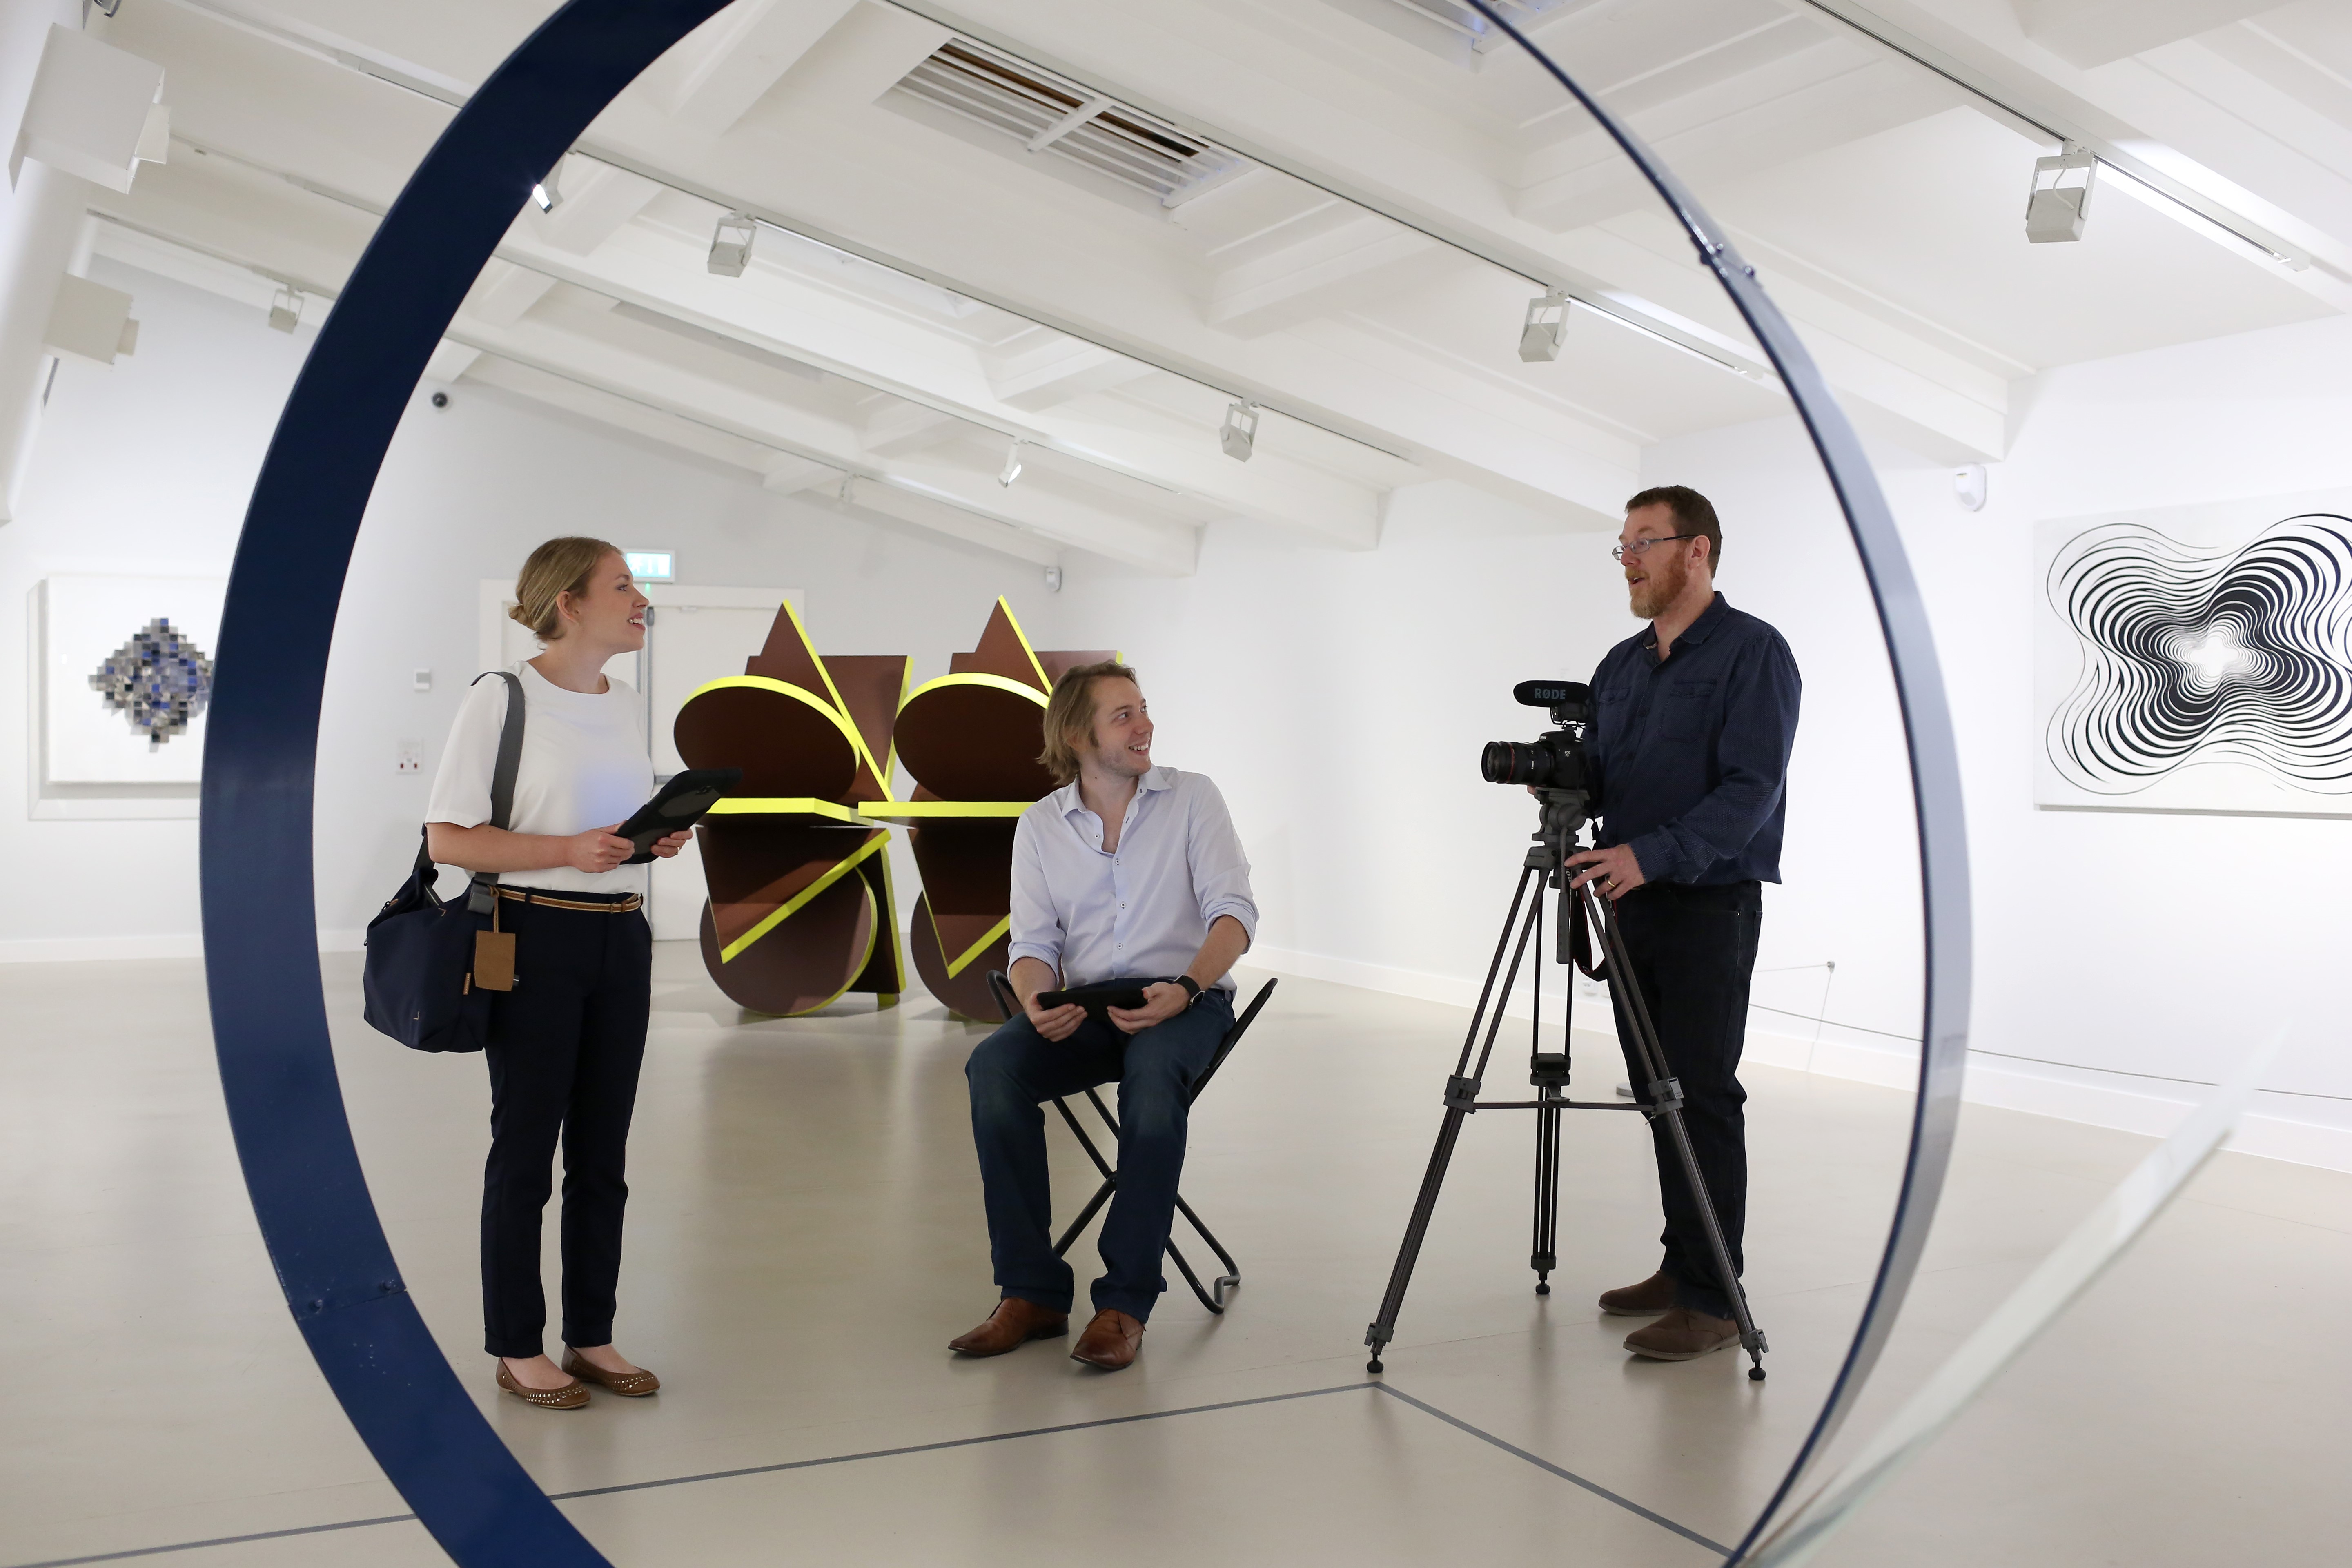 Three people stand in a museum space next to a video camera and an exhibit